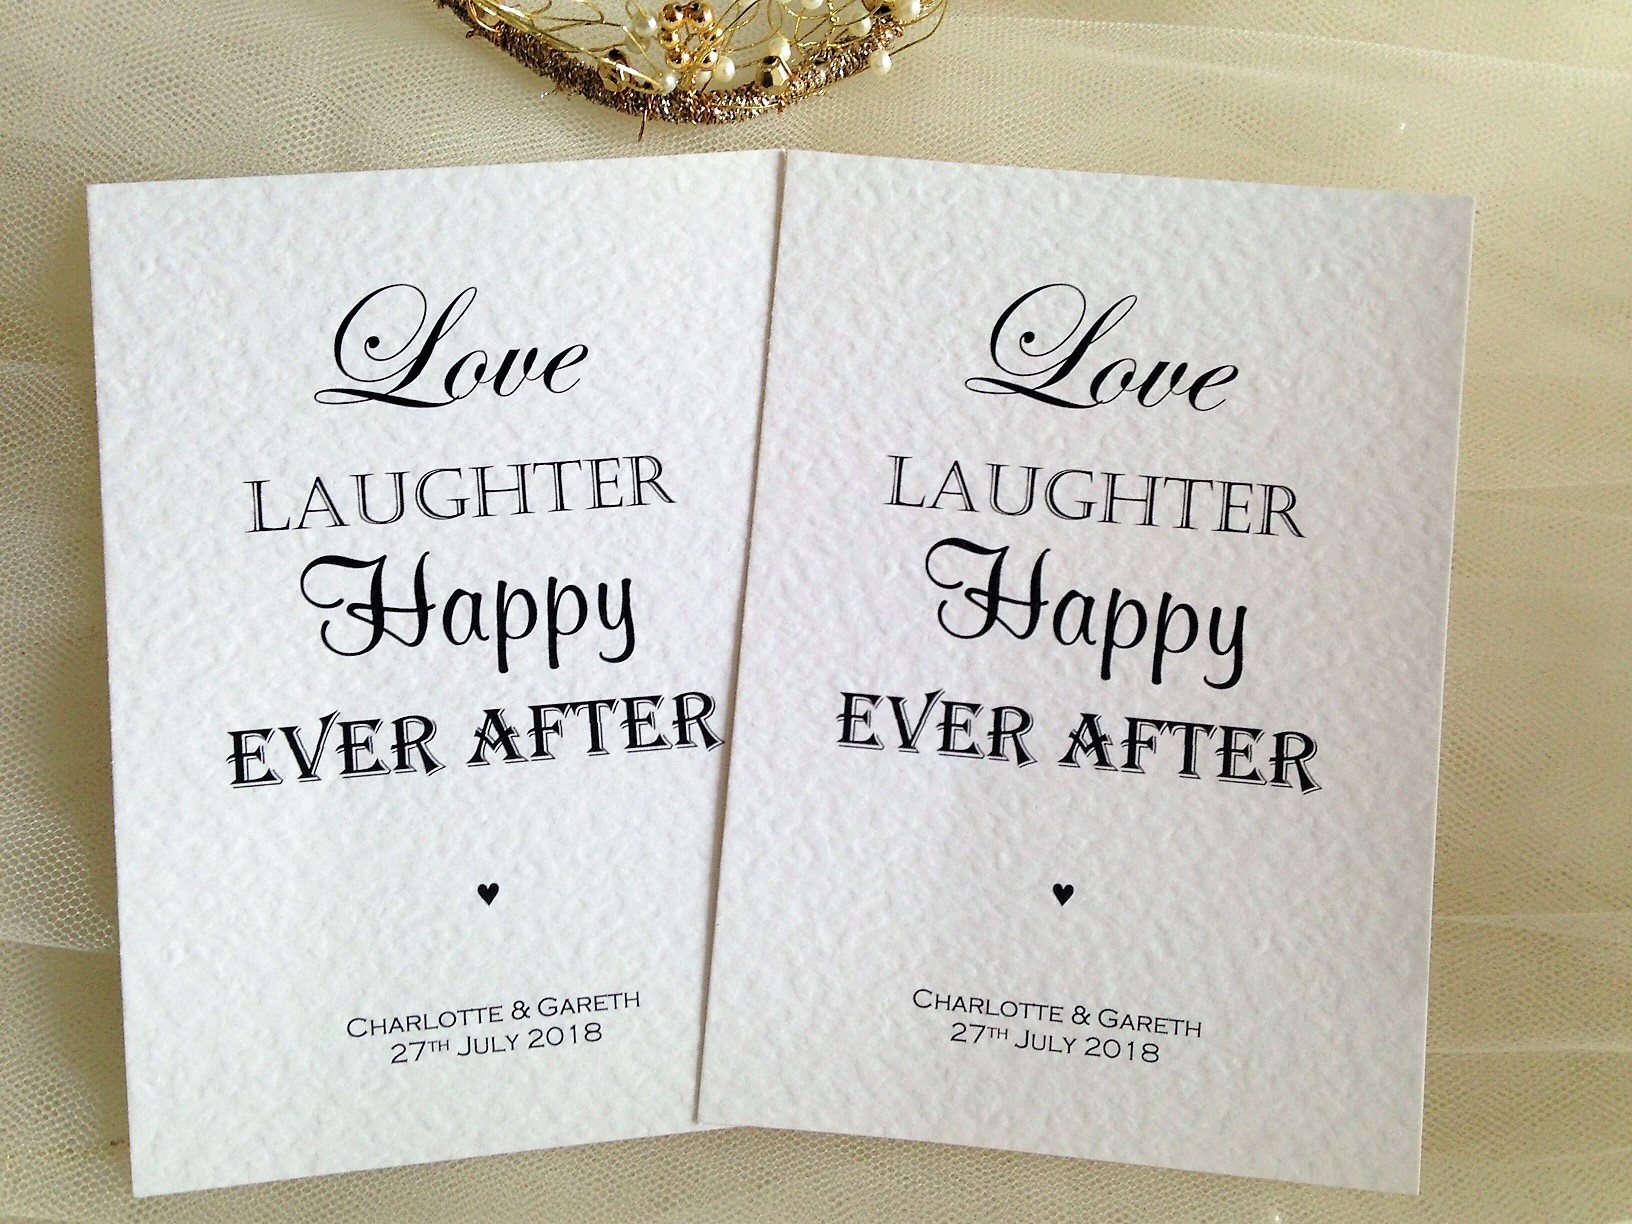 is-it-cheaper-to-make-own-wedding-invitations